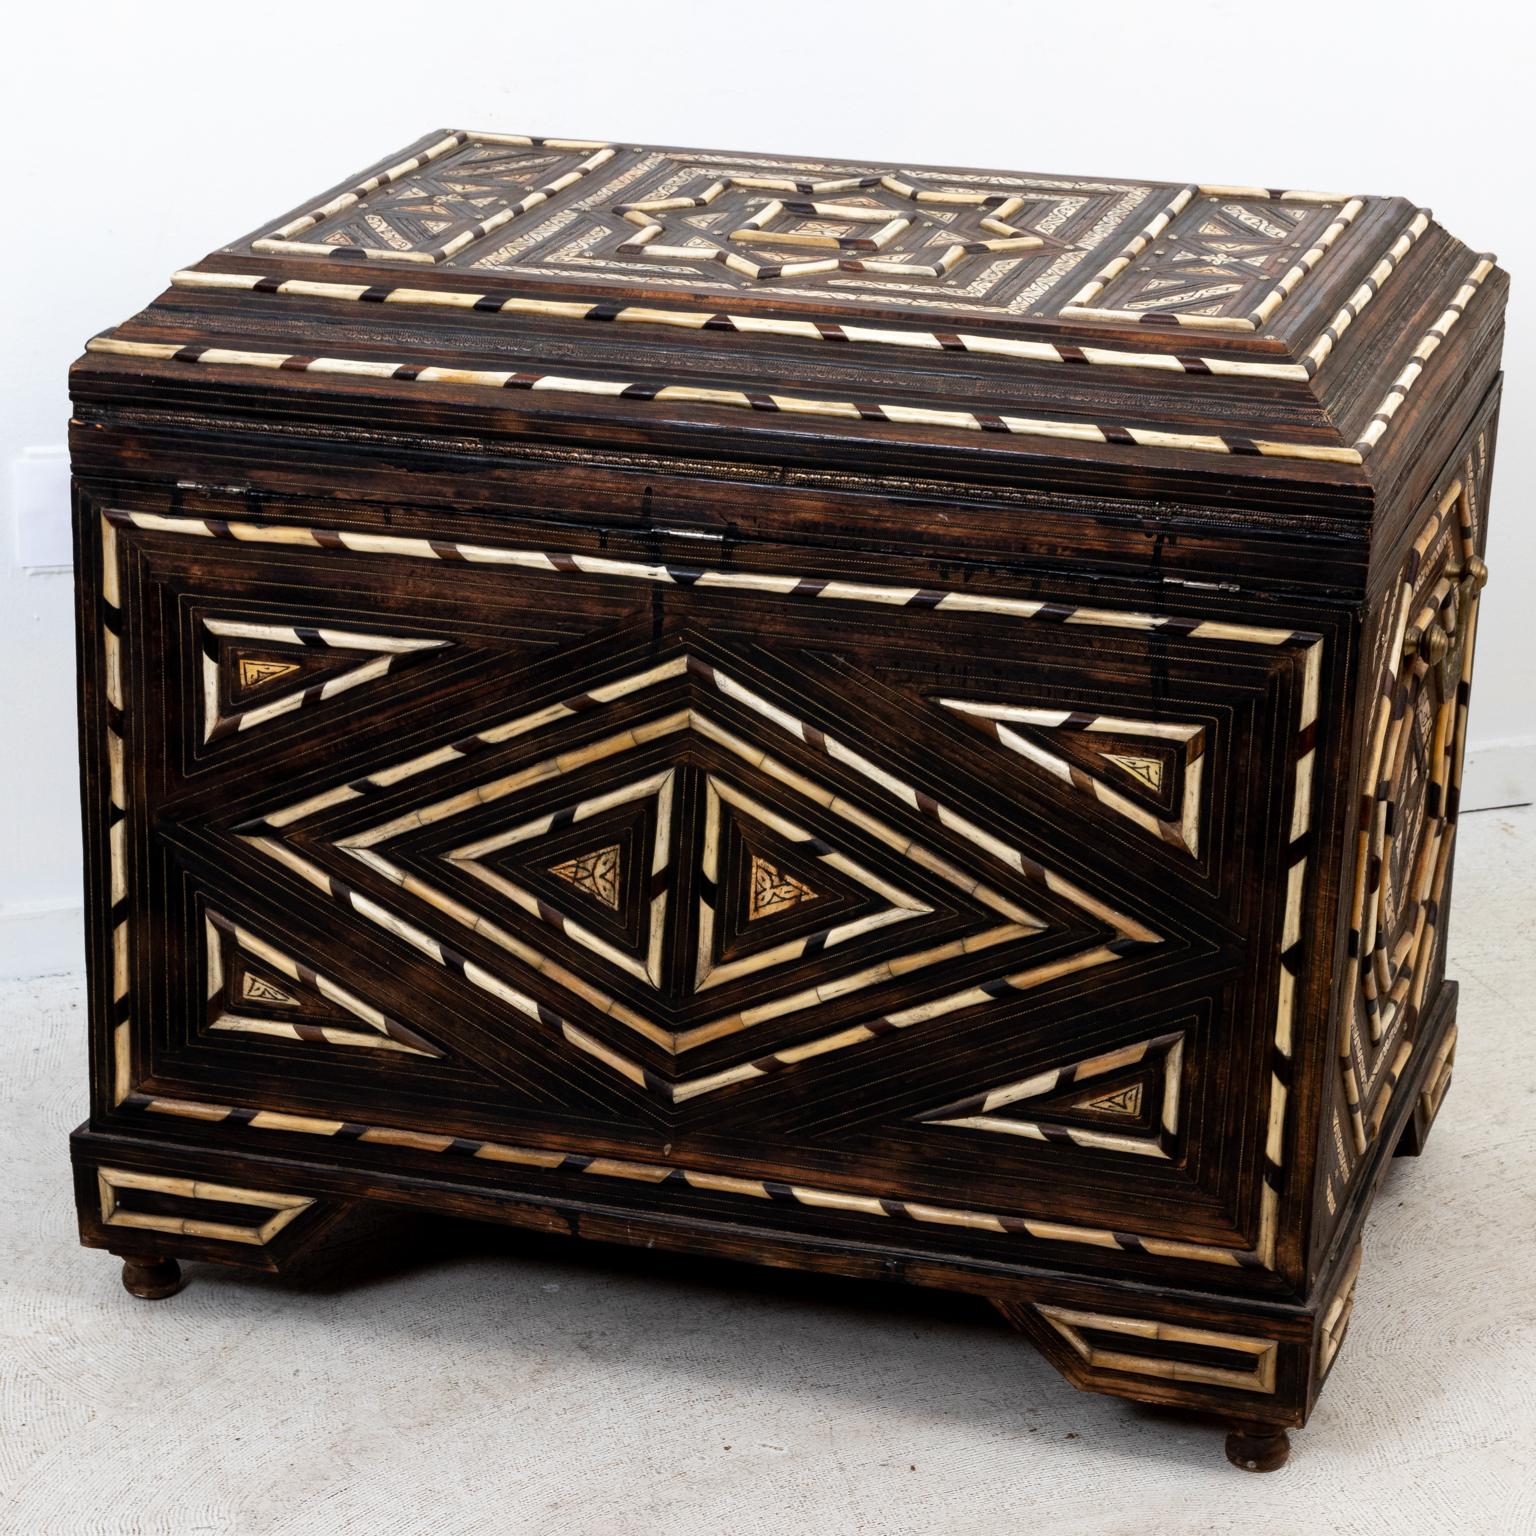 Bone inlaid Anglo-Indian style wooden trunk with metal hardware and geometric designs throughout the exterior of the case such as diamonds,octagons, and a starburst shape on the lid . Further carved detail can be seen on individual inlaid bone